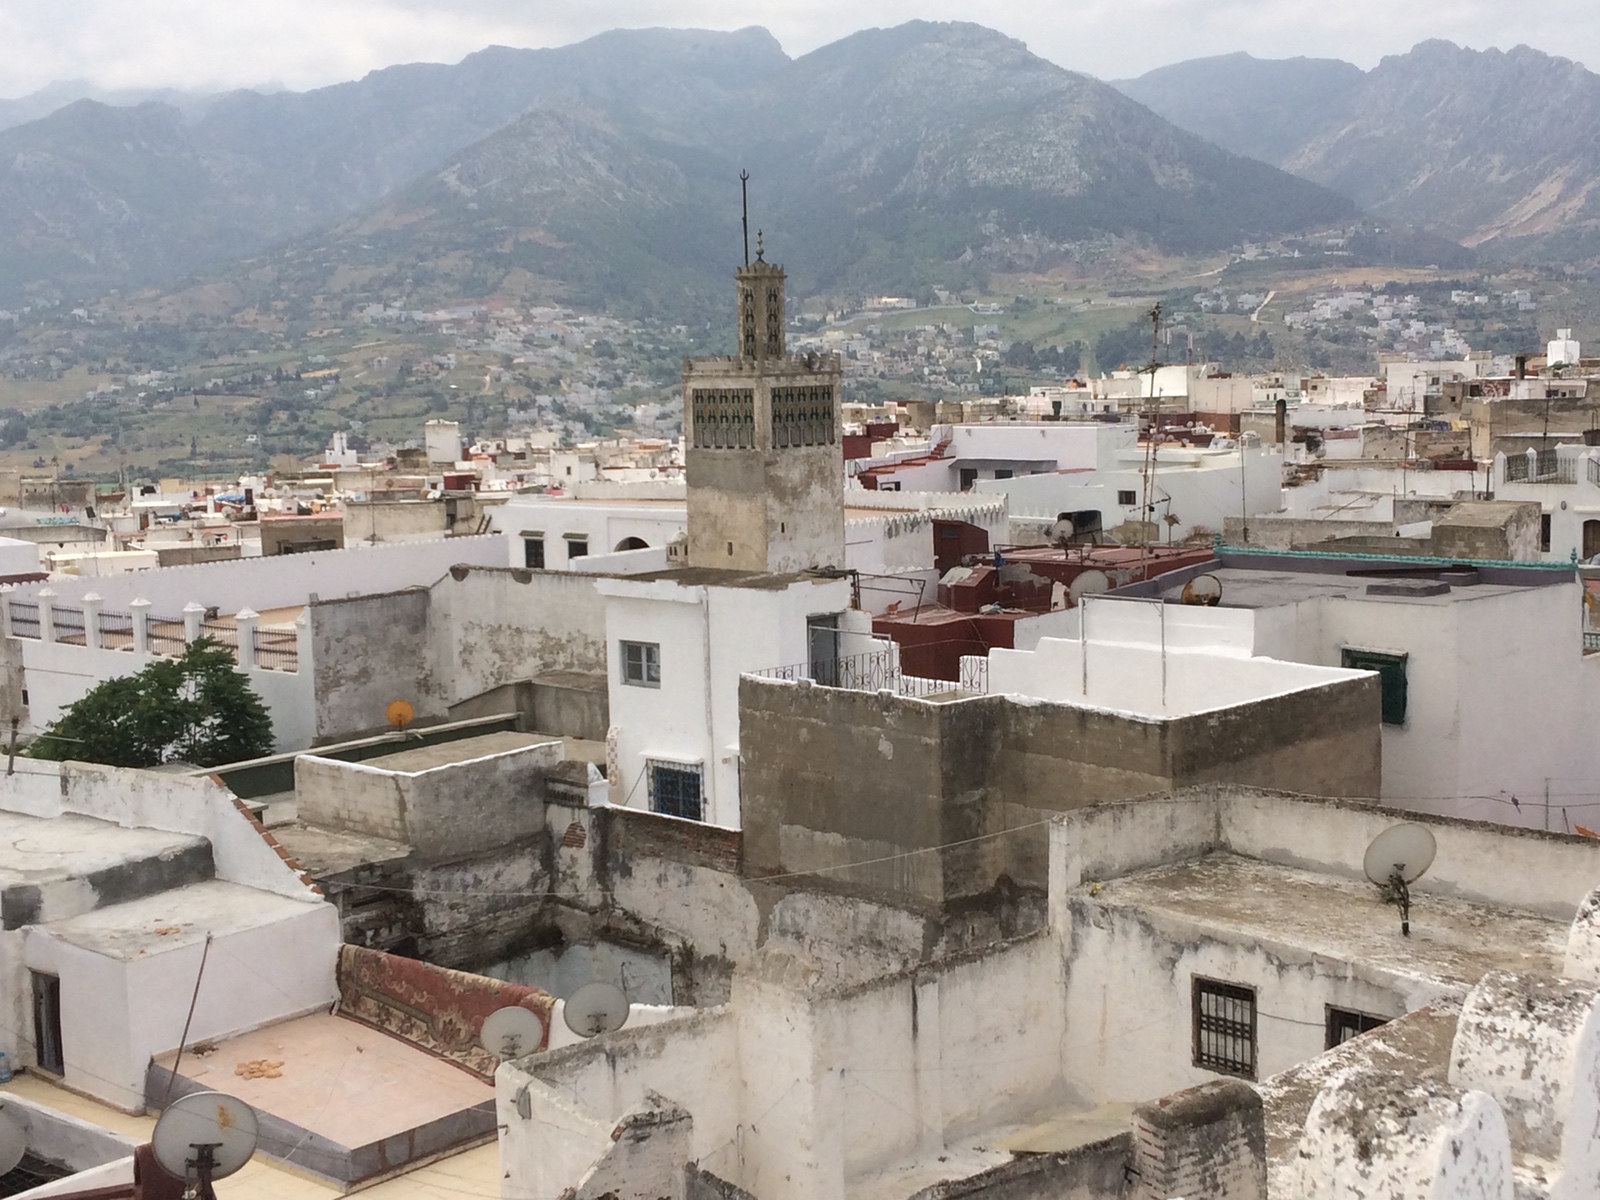 View across rooftops to a minaret